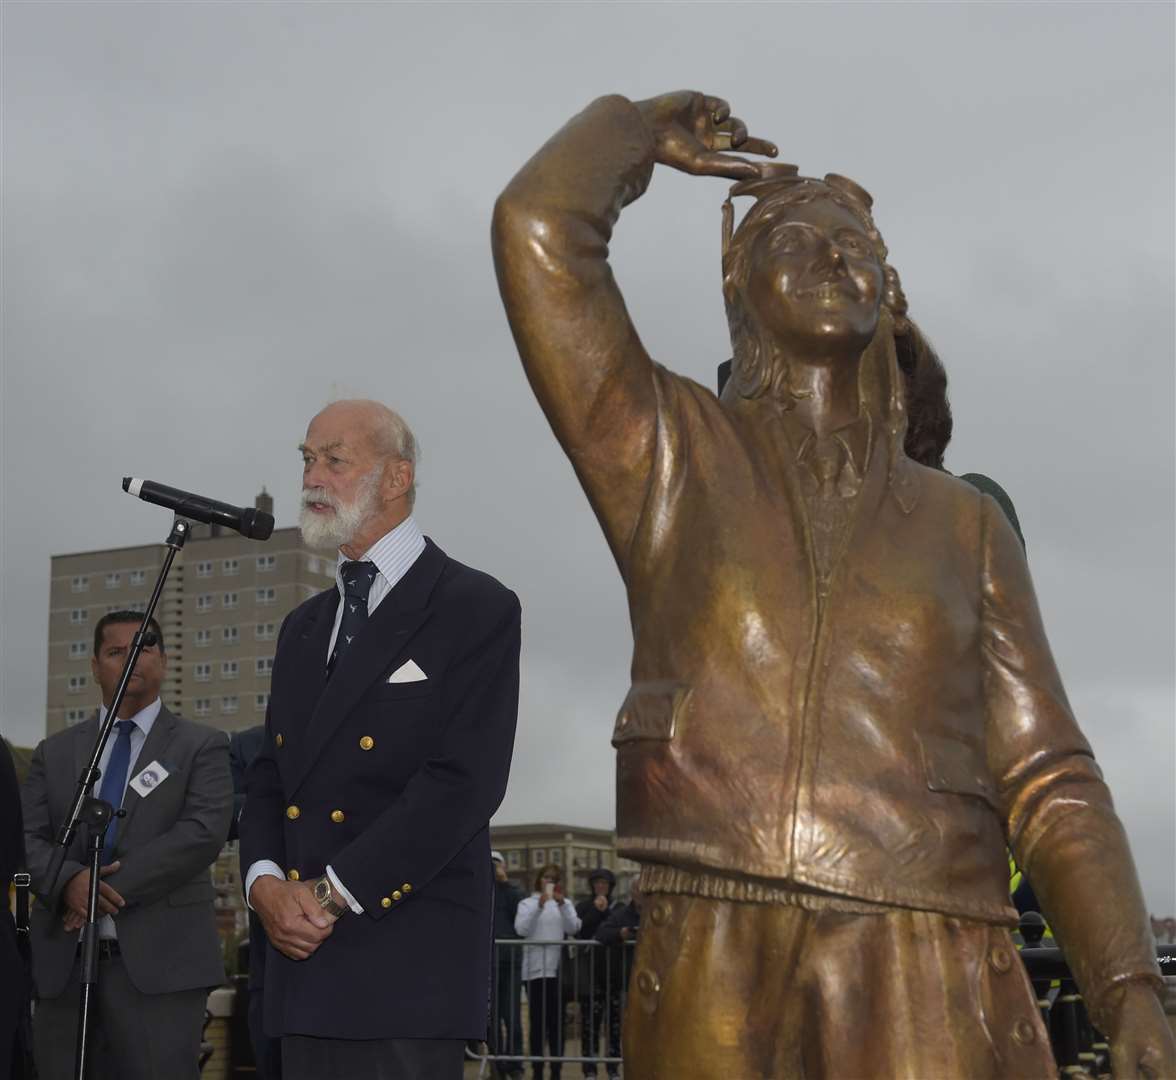 A bronze statue commemorating Amy Johnson was unveiled on Herne Bay seafront in 2016